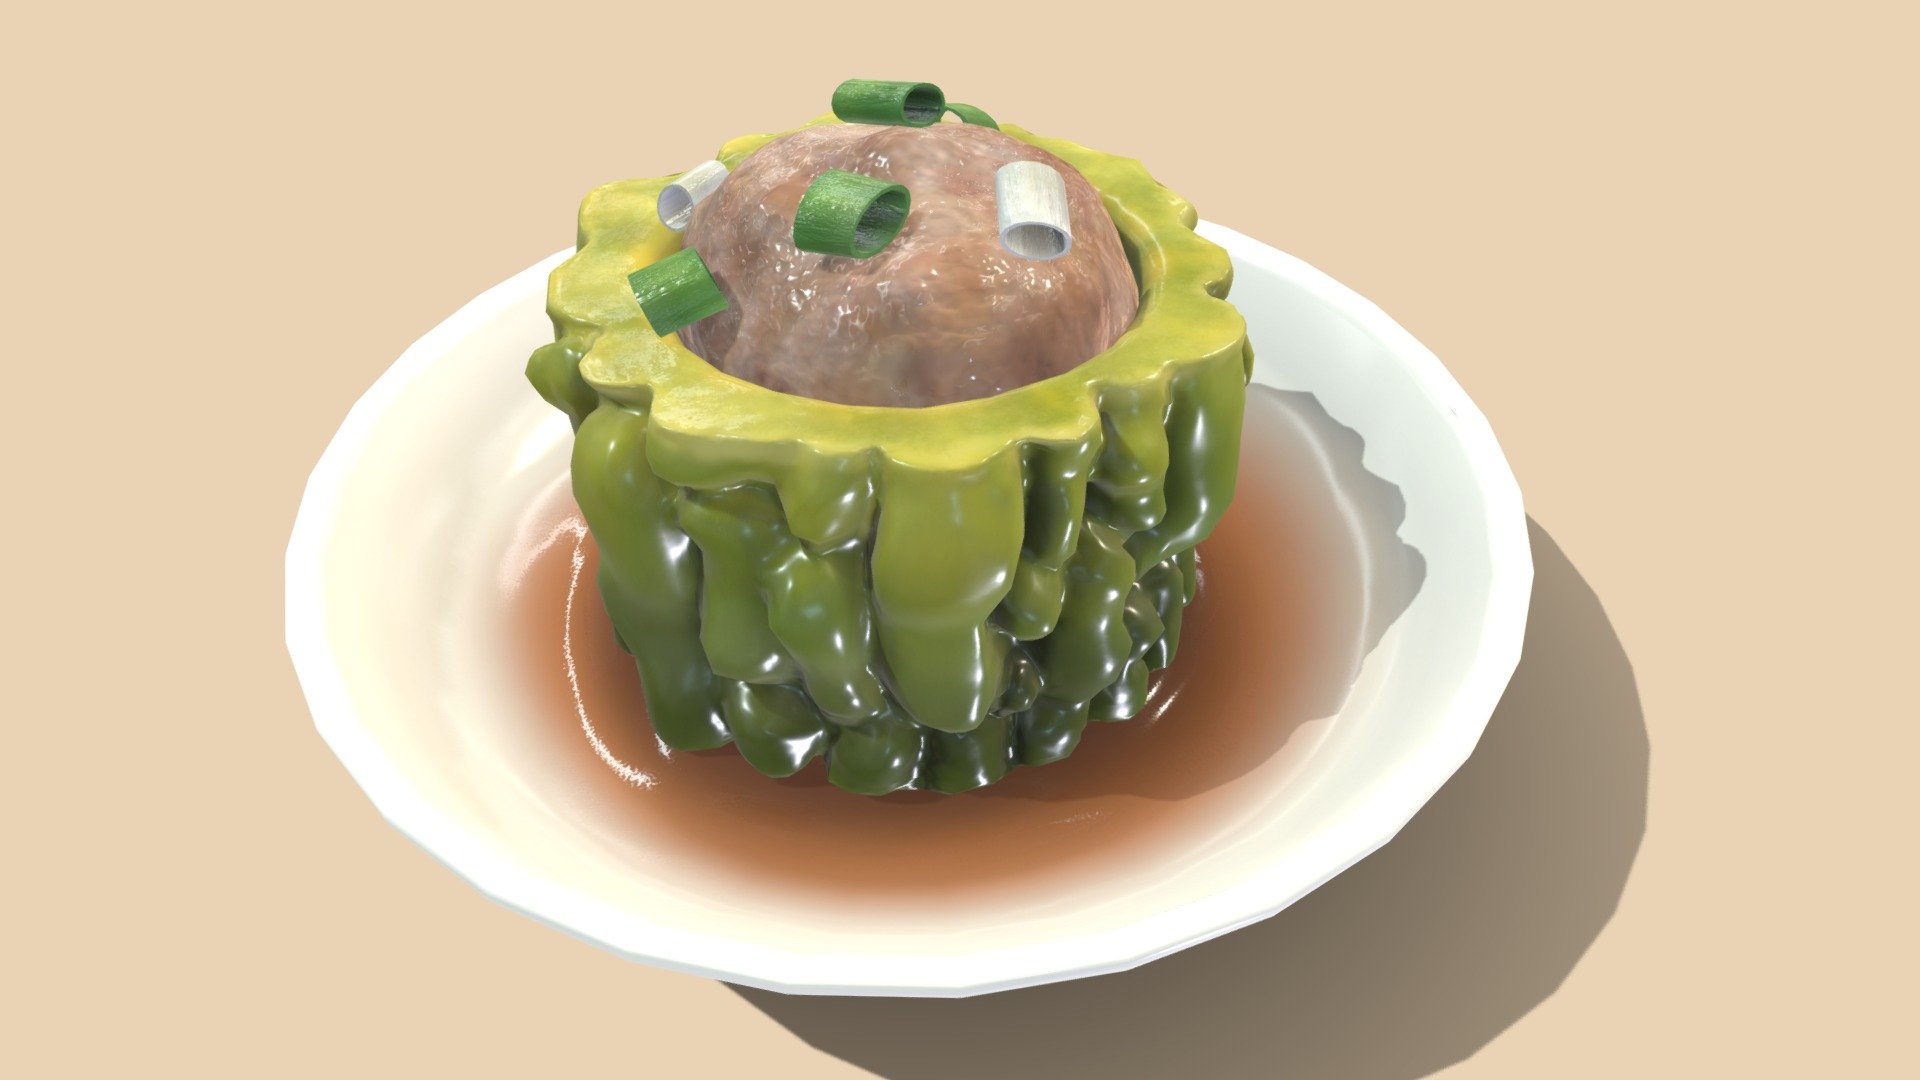 Hi~ It is a Asia food_Bitter gourd stuffed meat

It has 4868 Polys and 4871 Vertex.
It can be used in game,VR,AR,CG. 

It have 5 textures(PBR)

2048*2048 size

BaseColor1
Ao1
Metallic1
Normal1
Roughness*1

Display pics use Marmoset Toolbag to render.

I hope you like it~

Thank you.If you have any question , please tell me 3d model